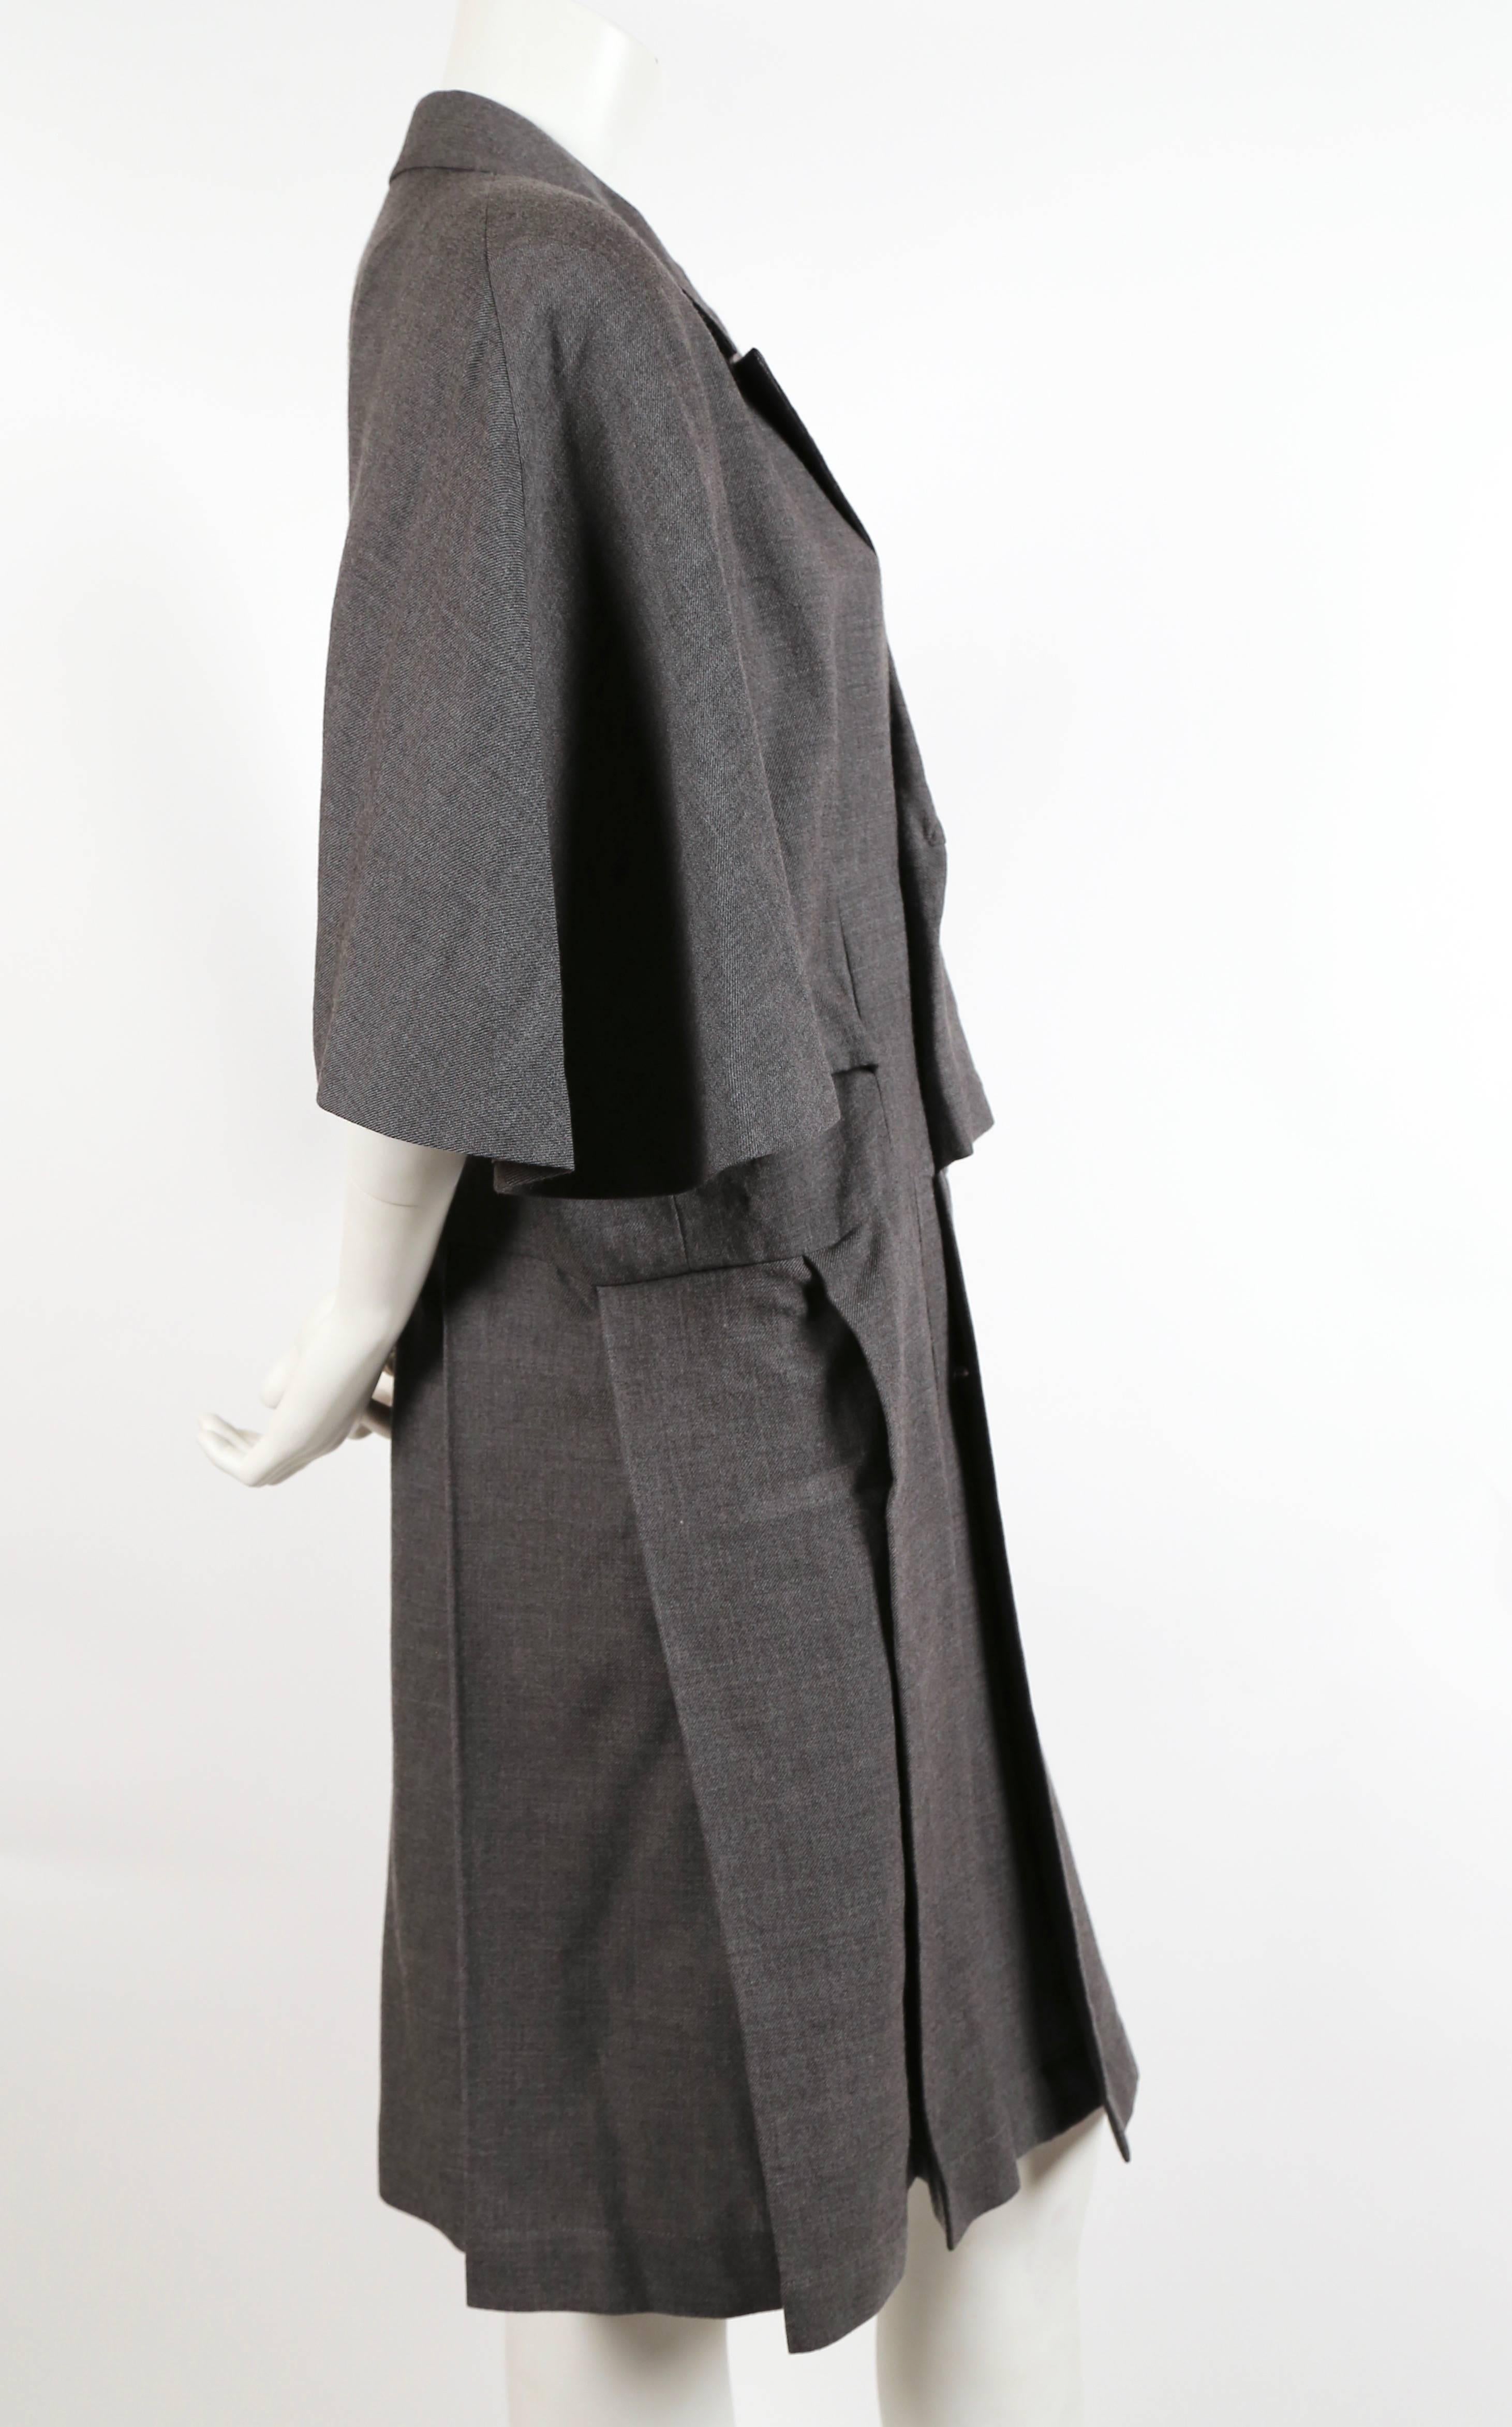 Very rare charcoal wool cape coat dress designed by Rei Kawakubo for Comme Des Garcons dating to the 1980's. Can be worn as a coat or dress. Size 'S'. Approximate measurements: bust open, waist 37